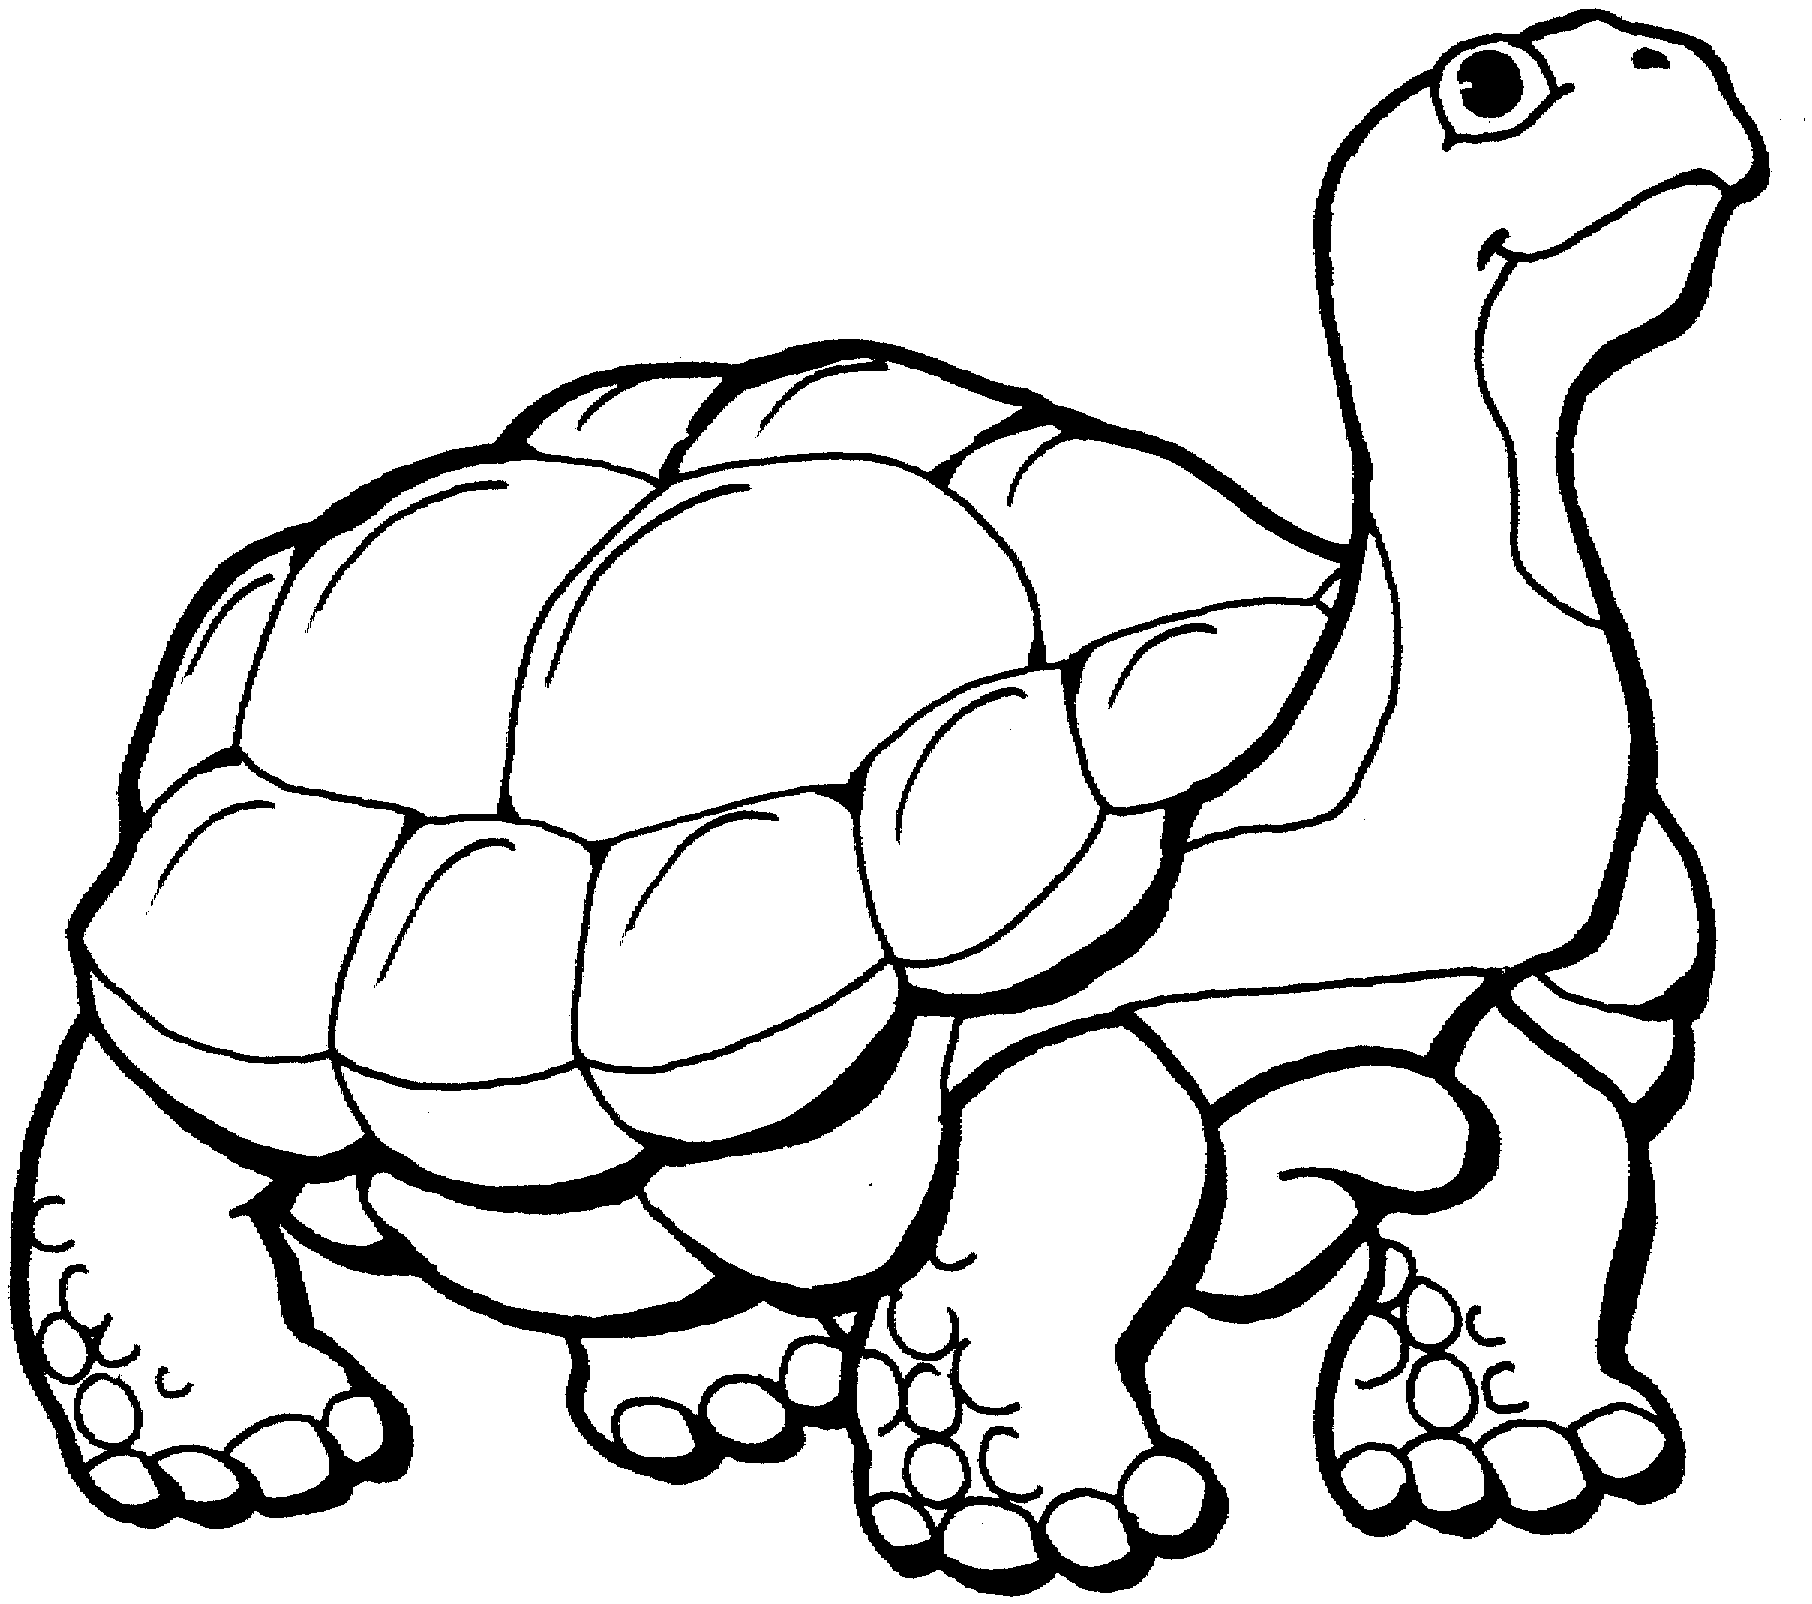 Land turtle clipart black and white 